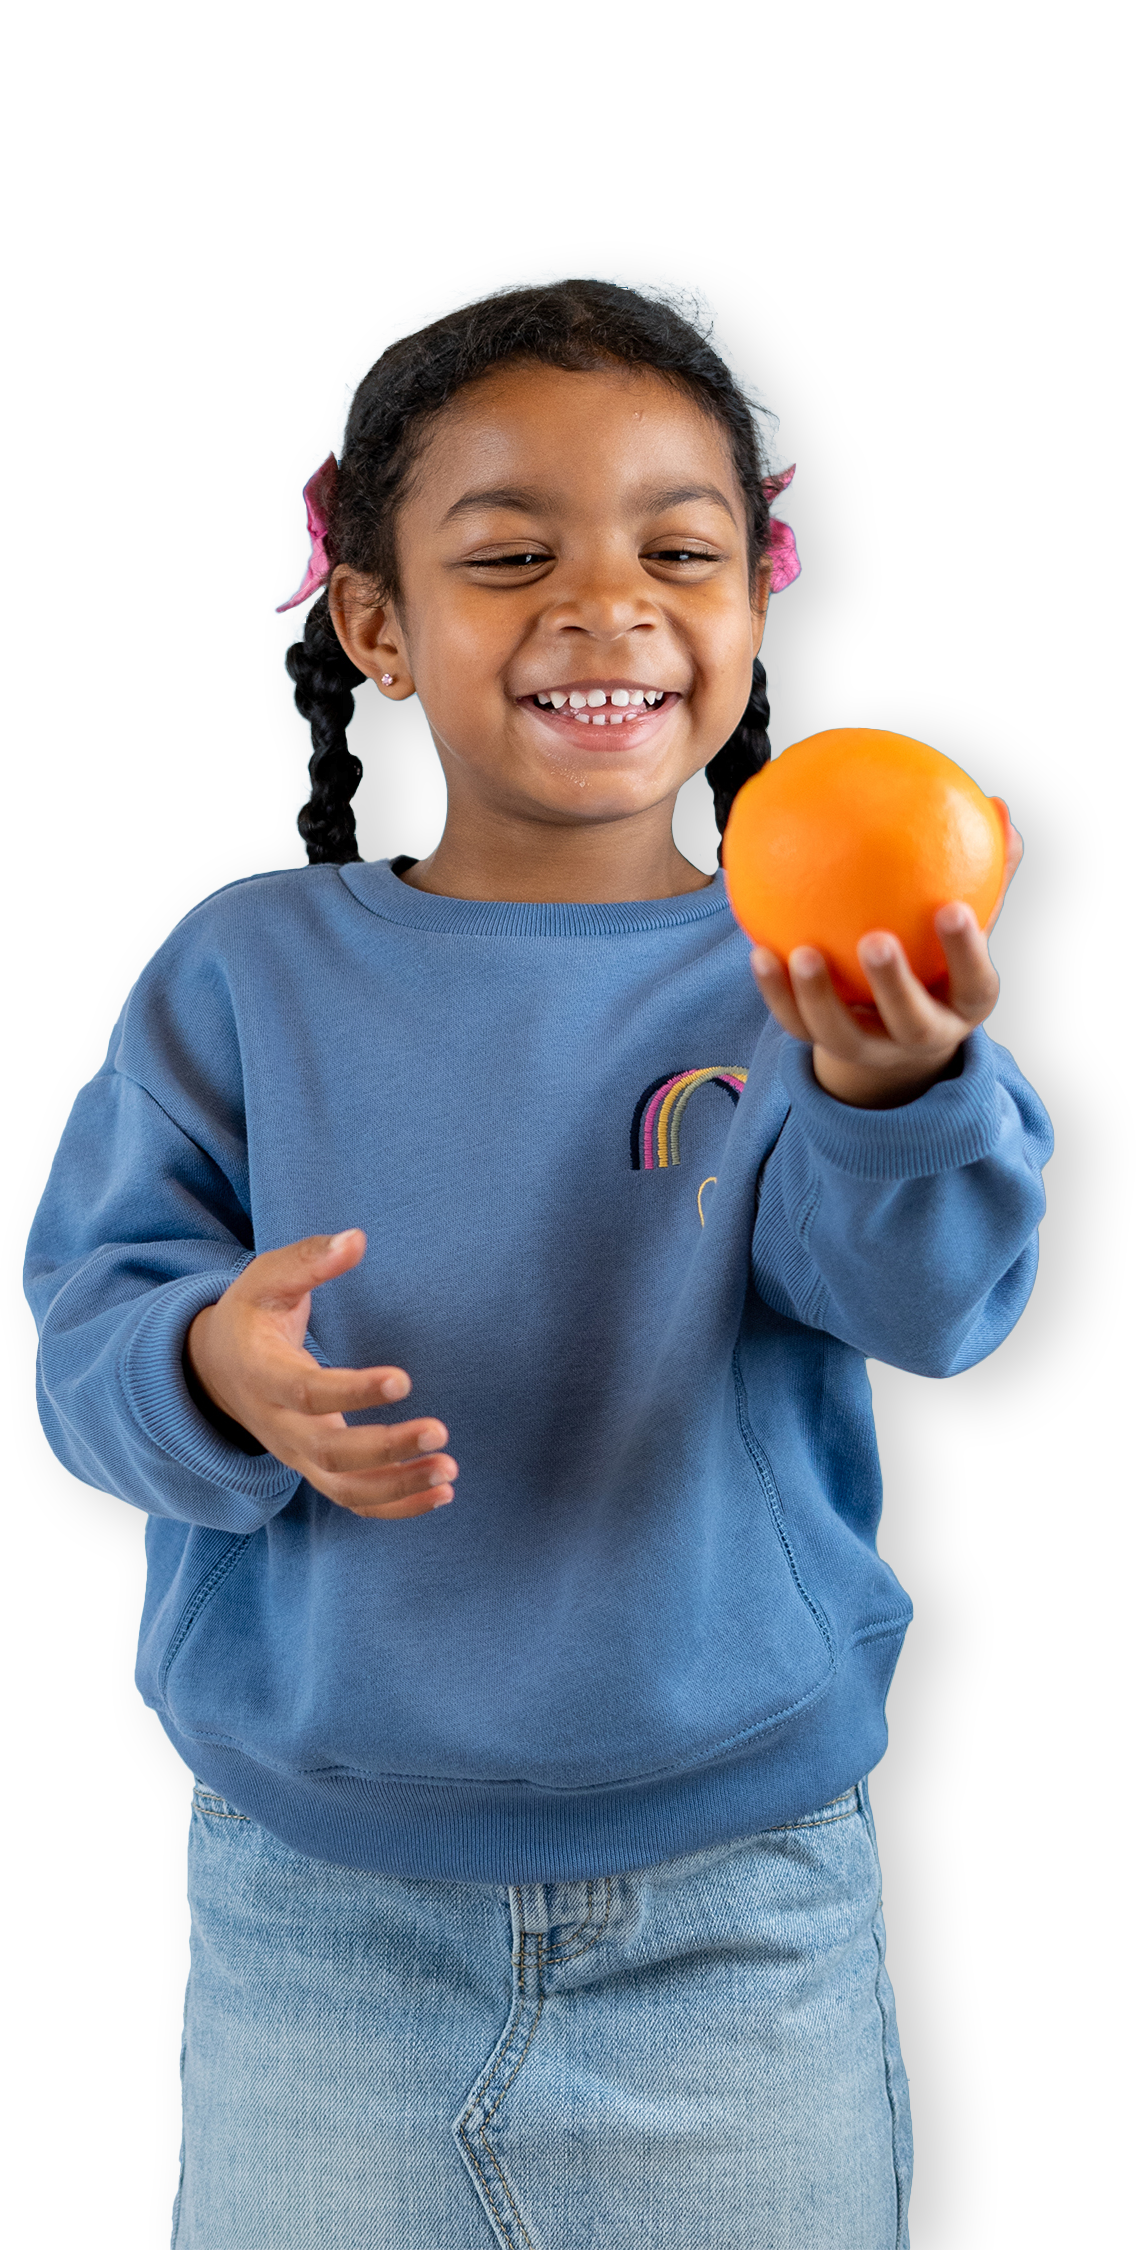 A young girl holding an orange.